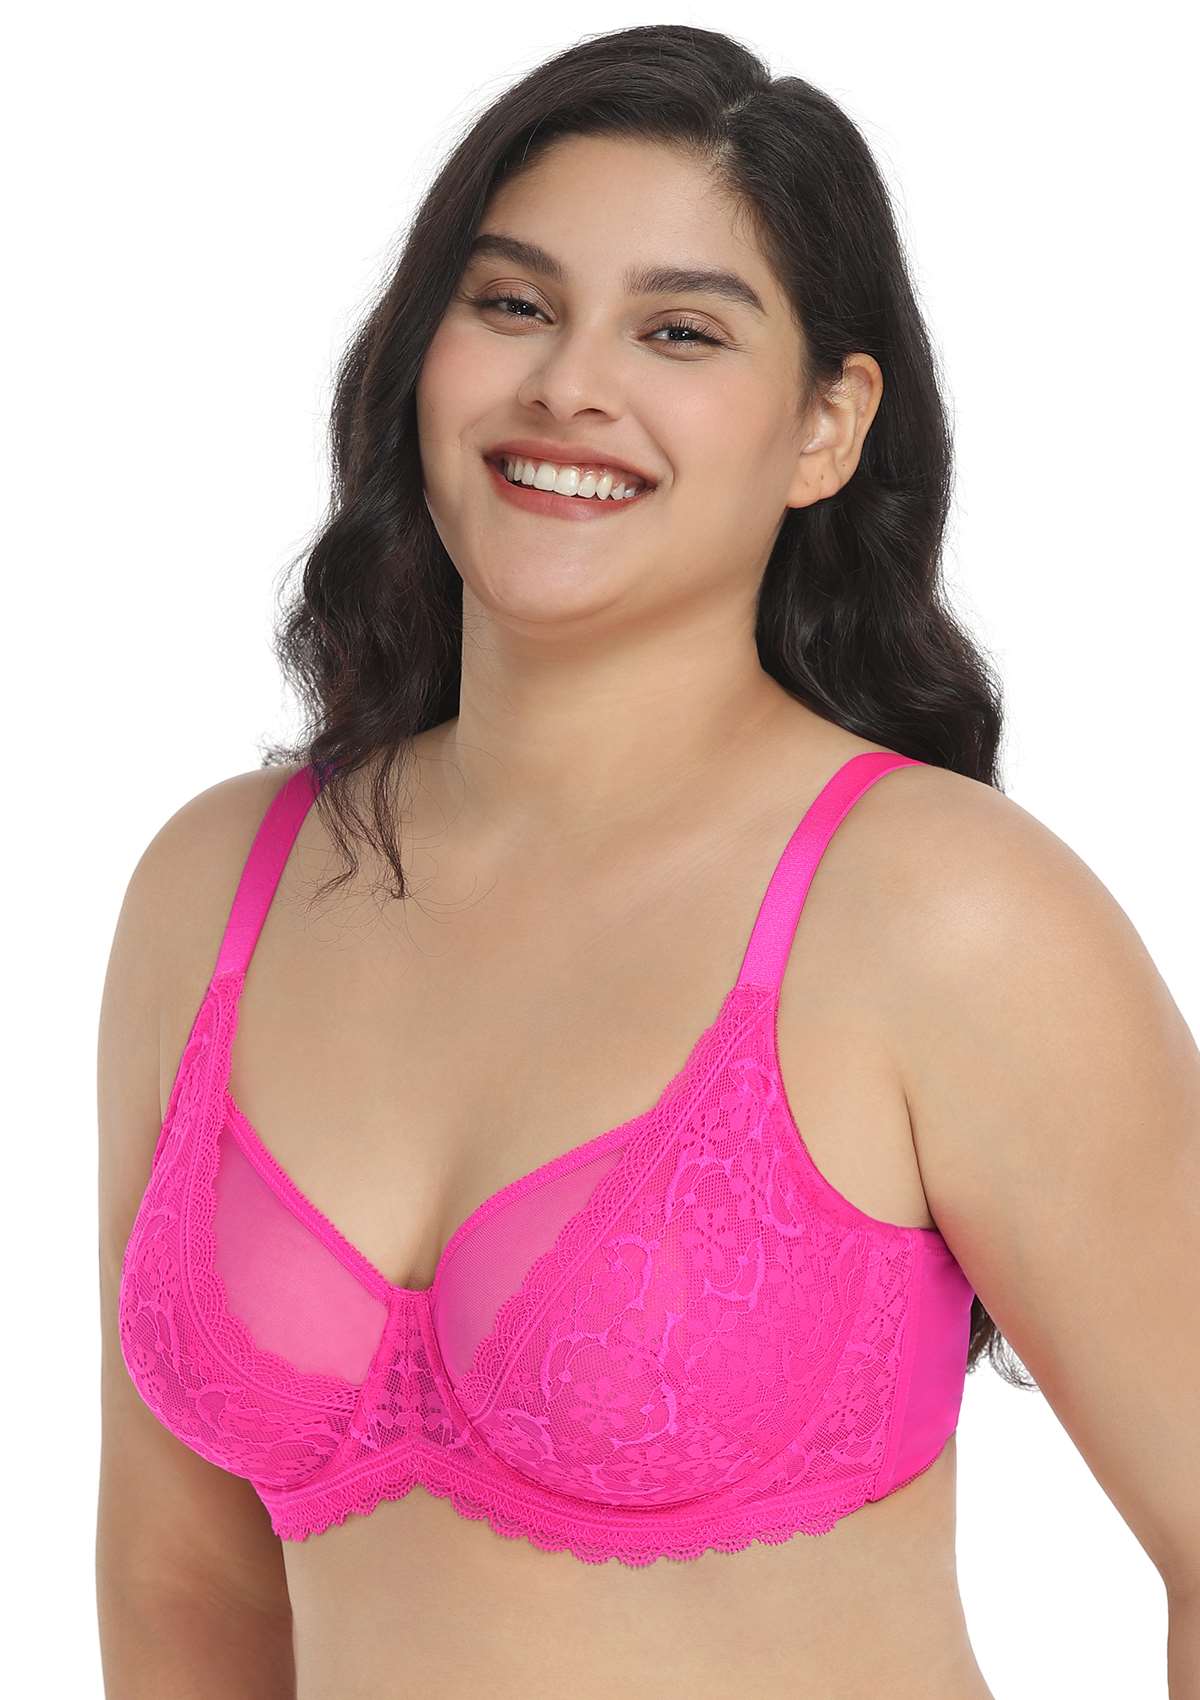 HSIA Anemone Lace Unlined Bra: Supportive, Lightweight Bra - Ginger / 36 / C